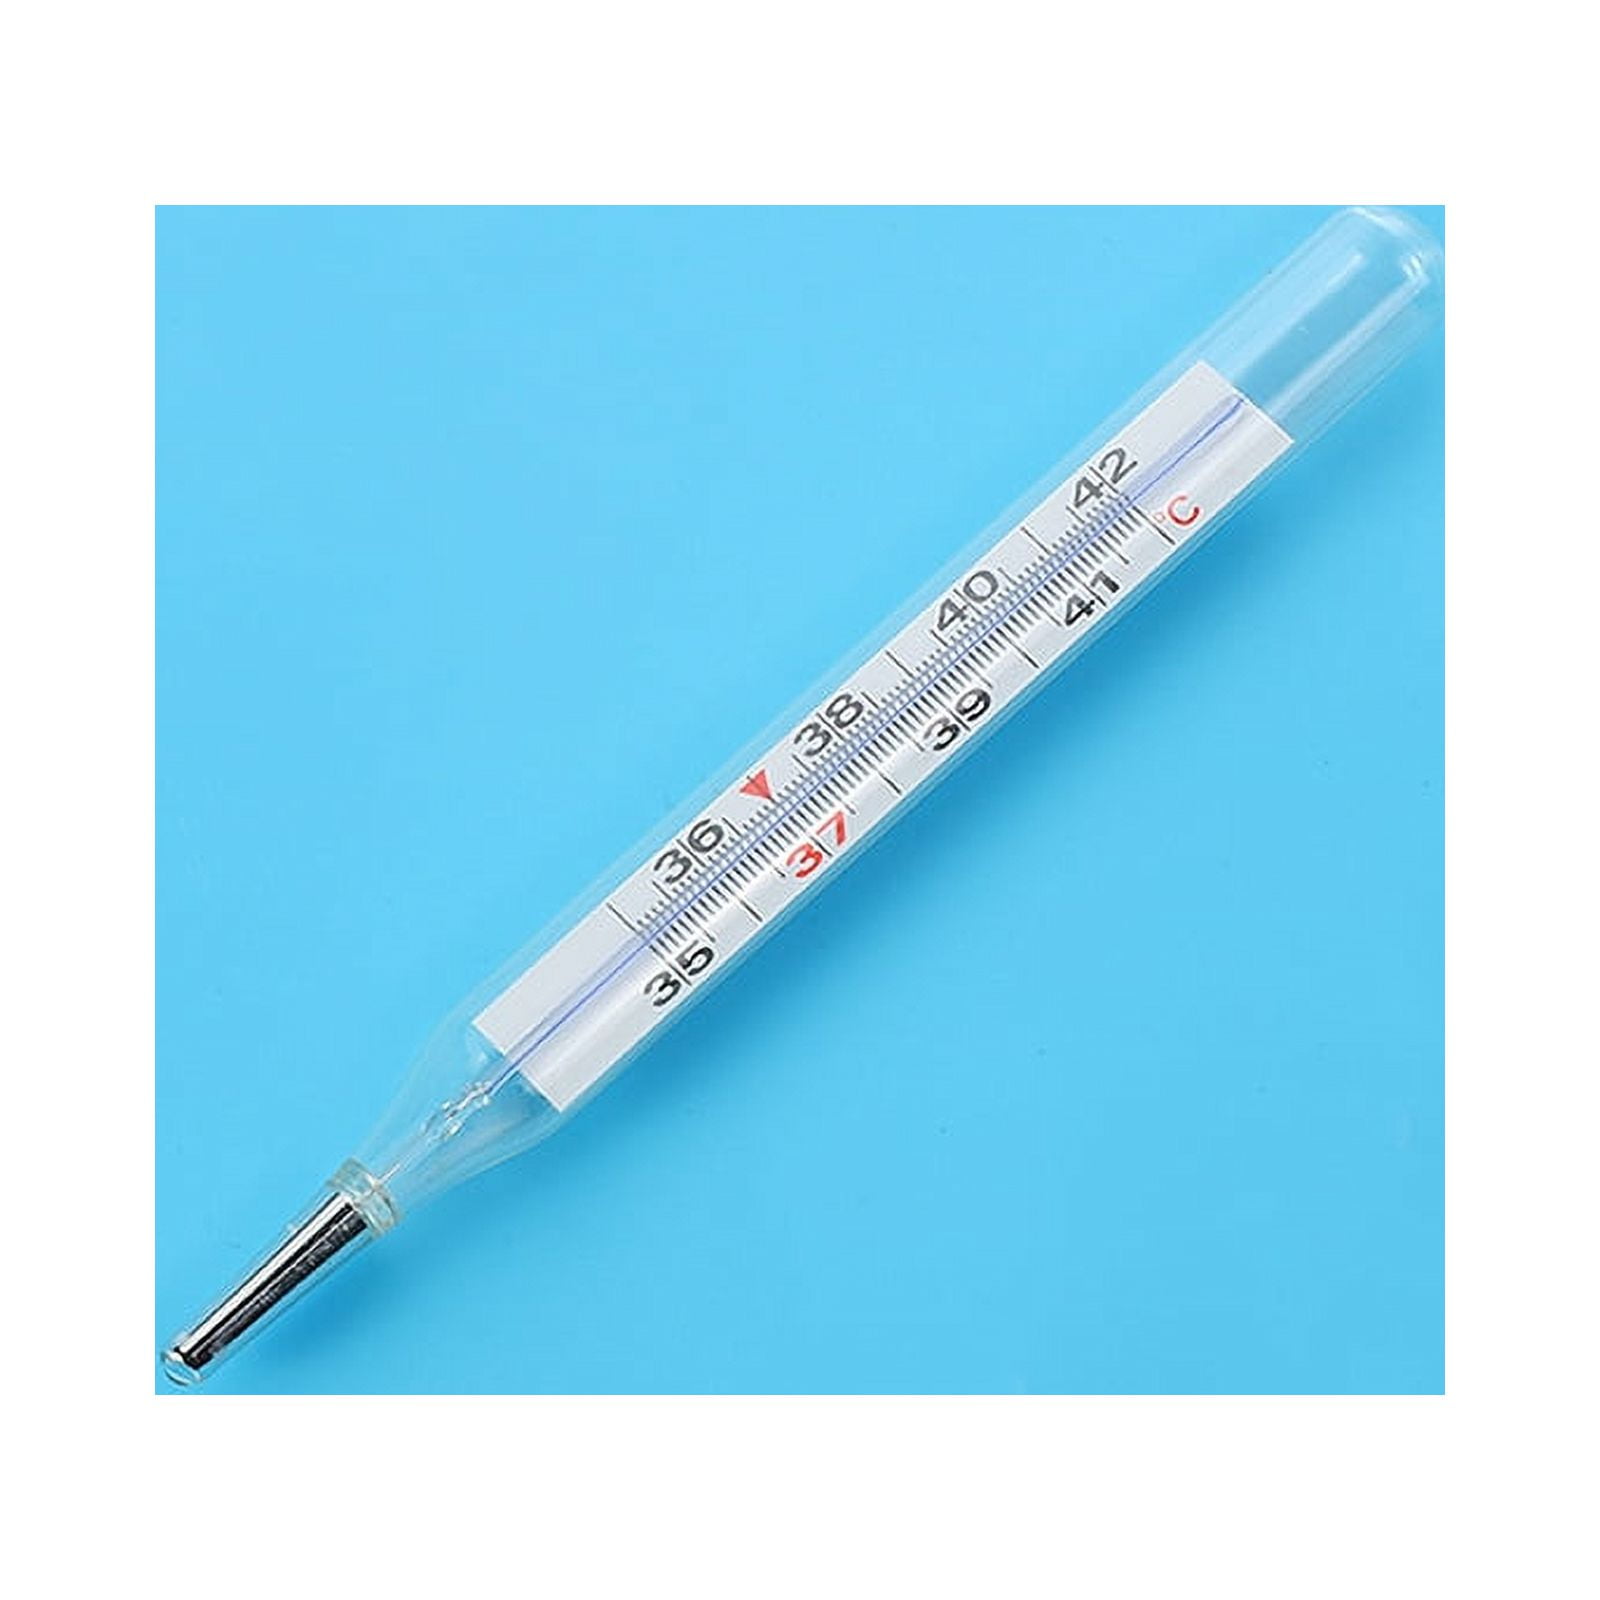 3 Reasons Why Digital Thermometer is Better than Normal Mercury Thermometer